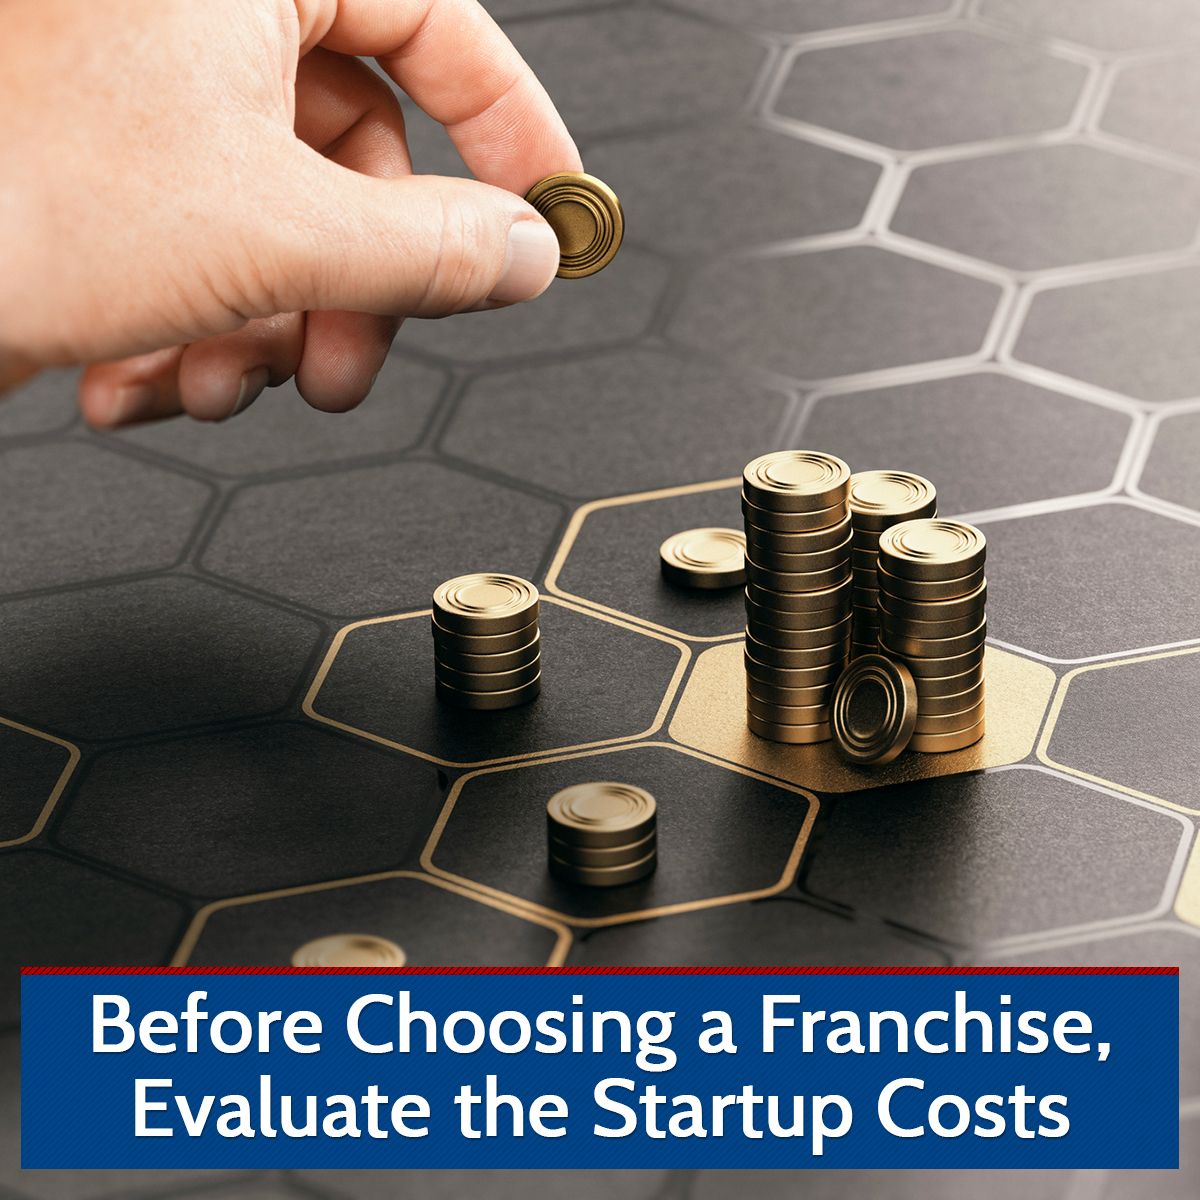 Before Choosing a Franchise, Evaluate the Startup Costs